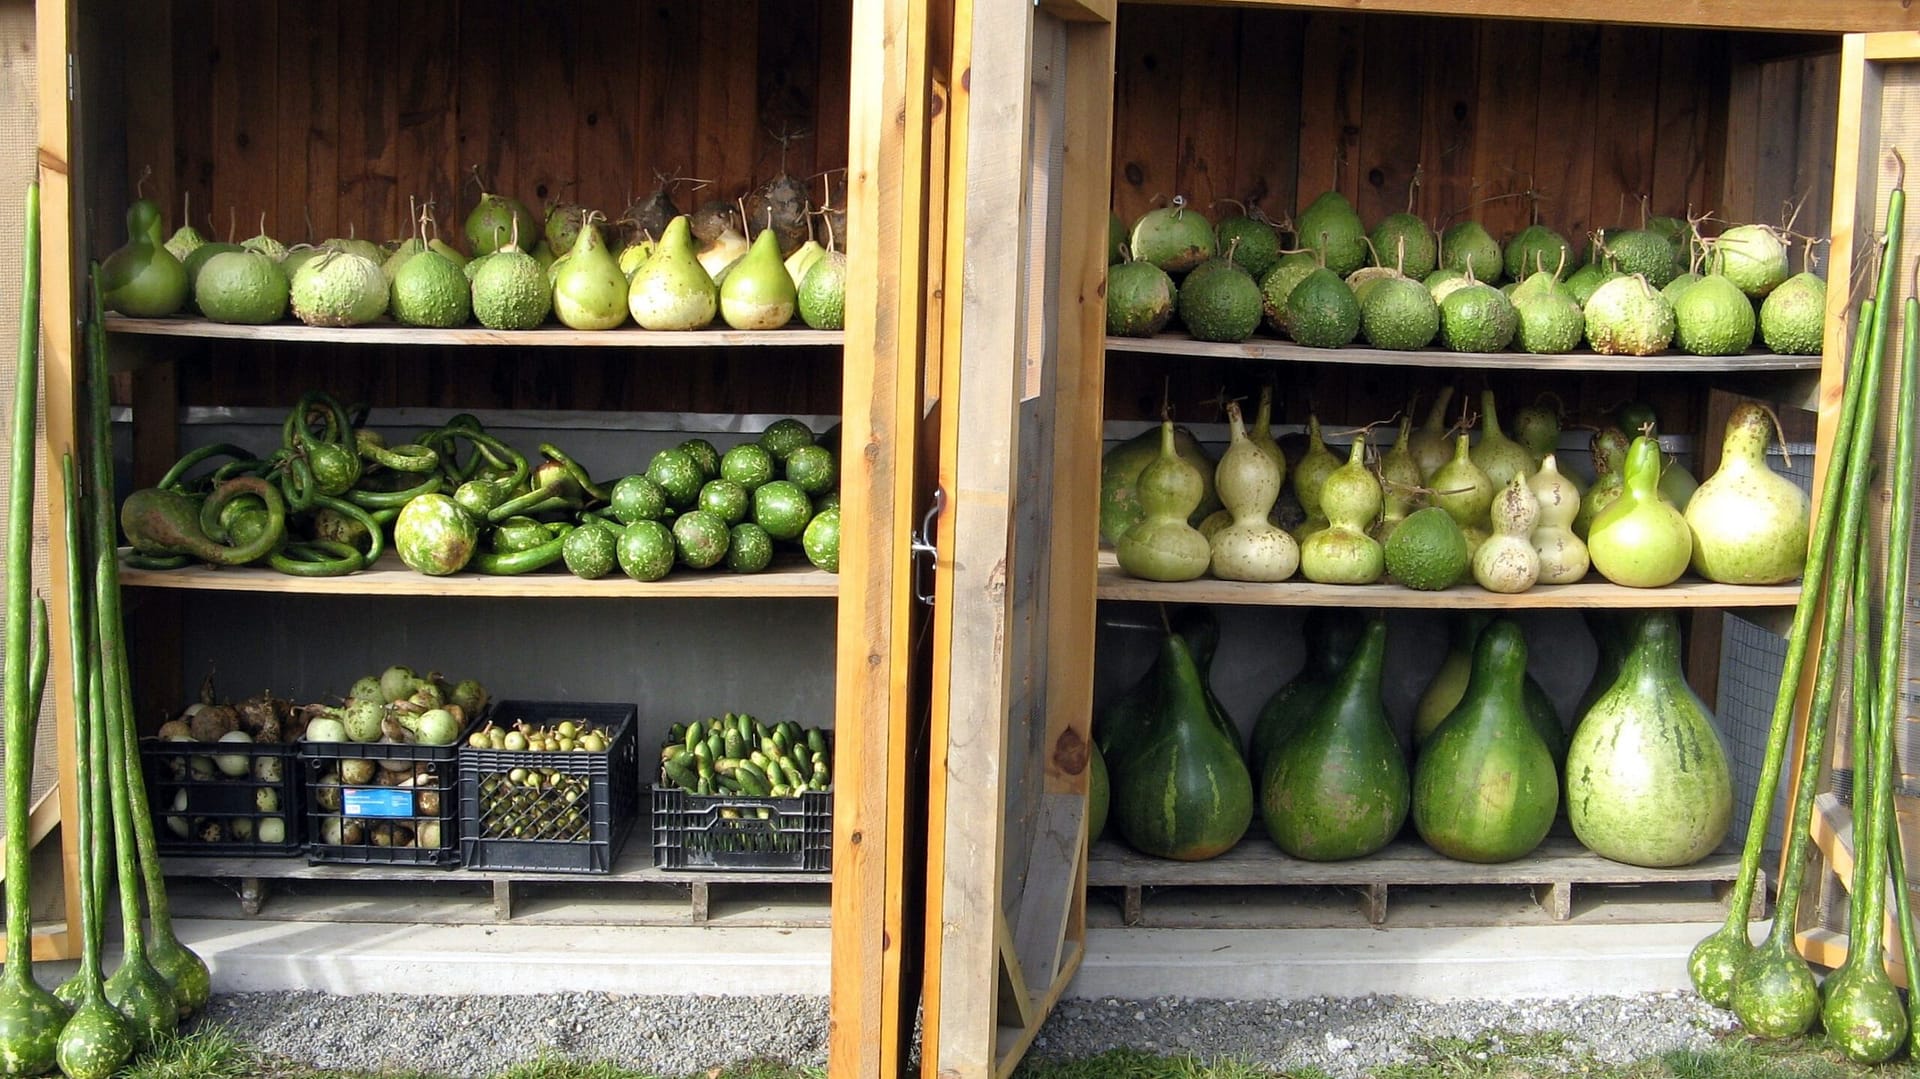 Image: Varieties of gourds in all shapes and sizes their drying shelves!